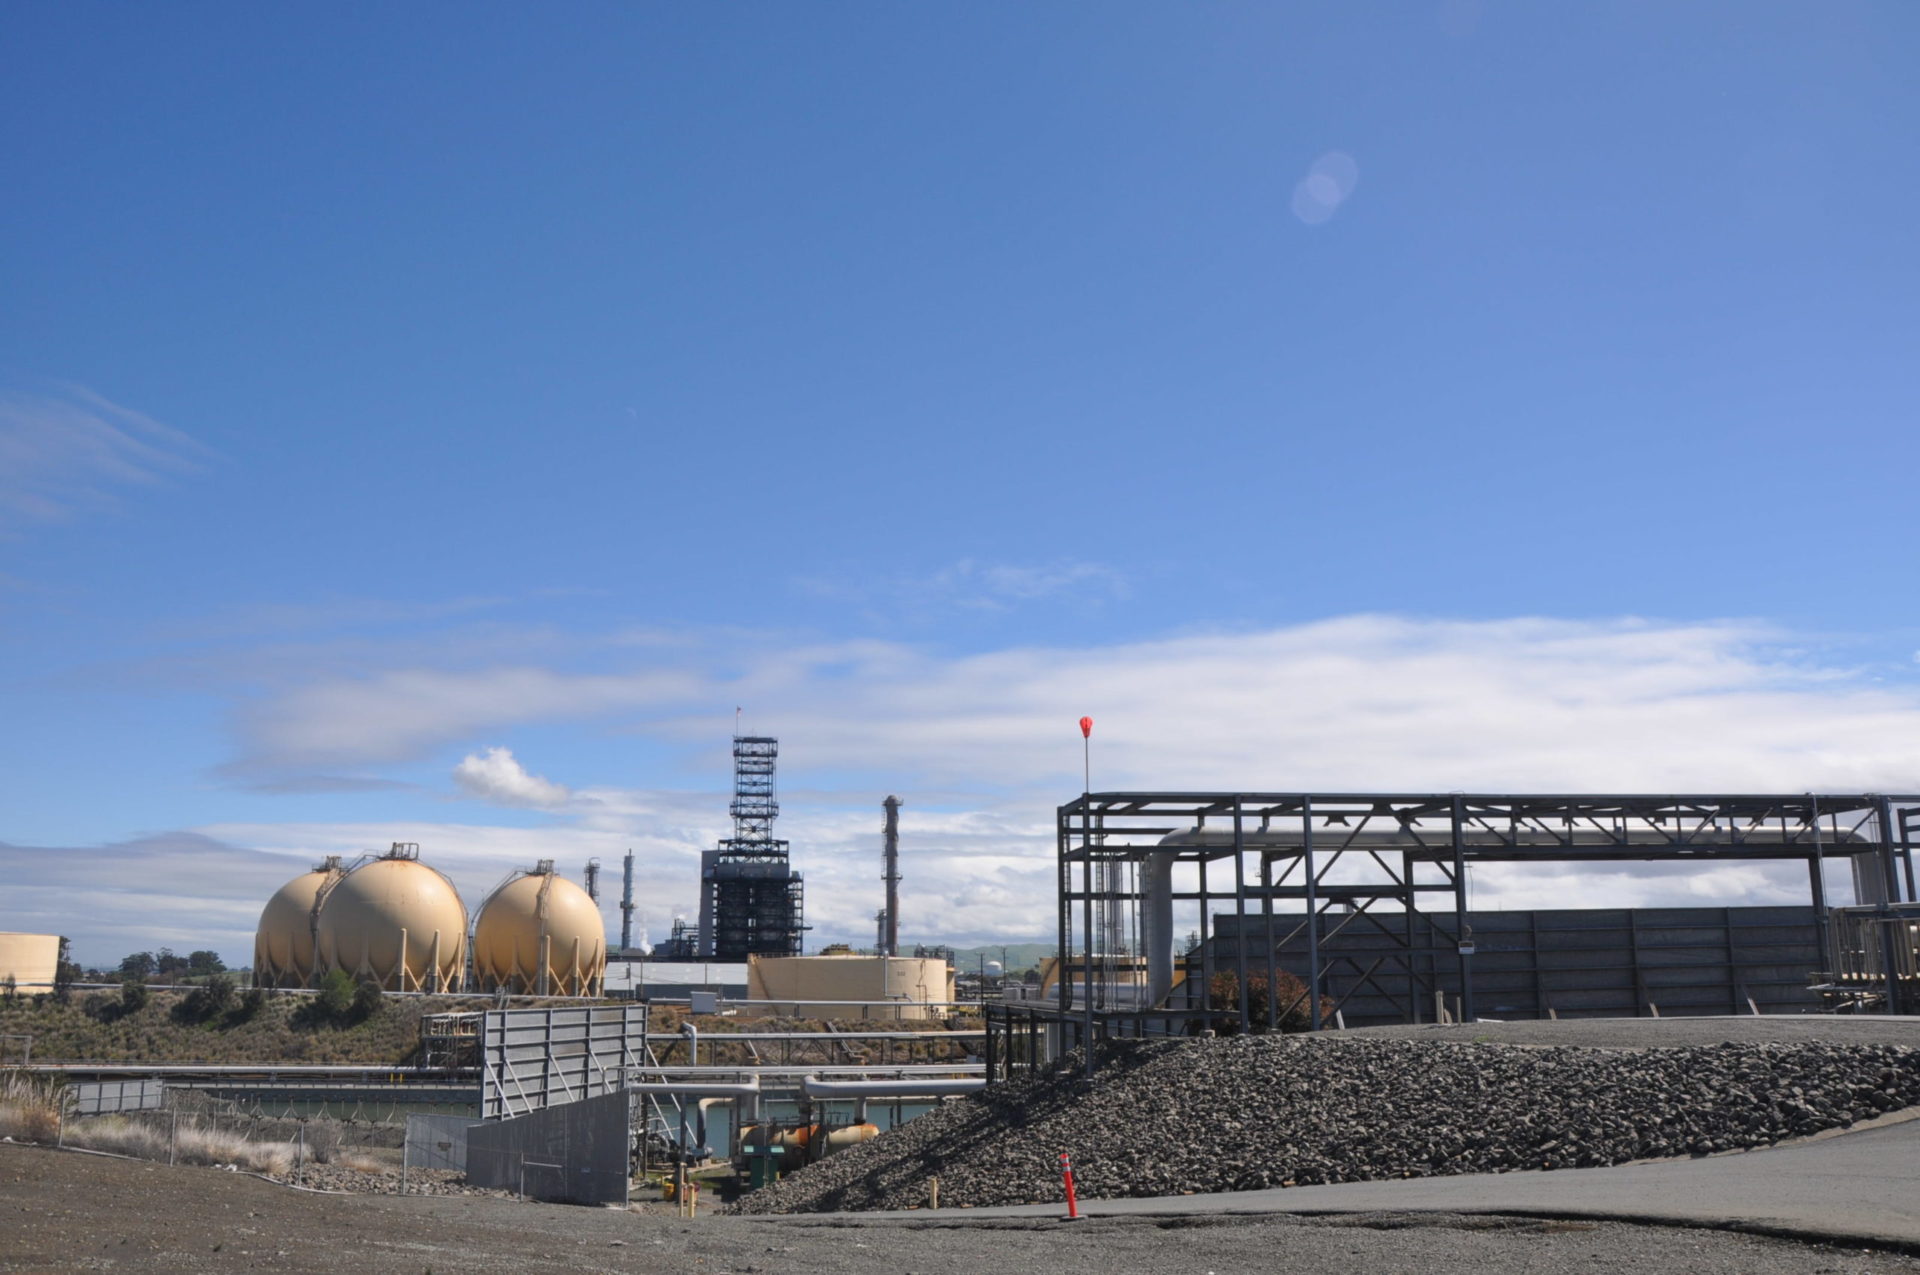 Image from the Gallery: Shell Refinery – Martinez, CA